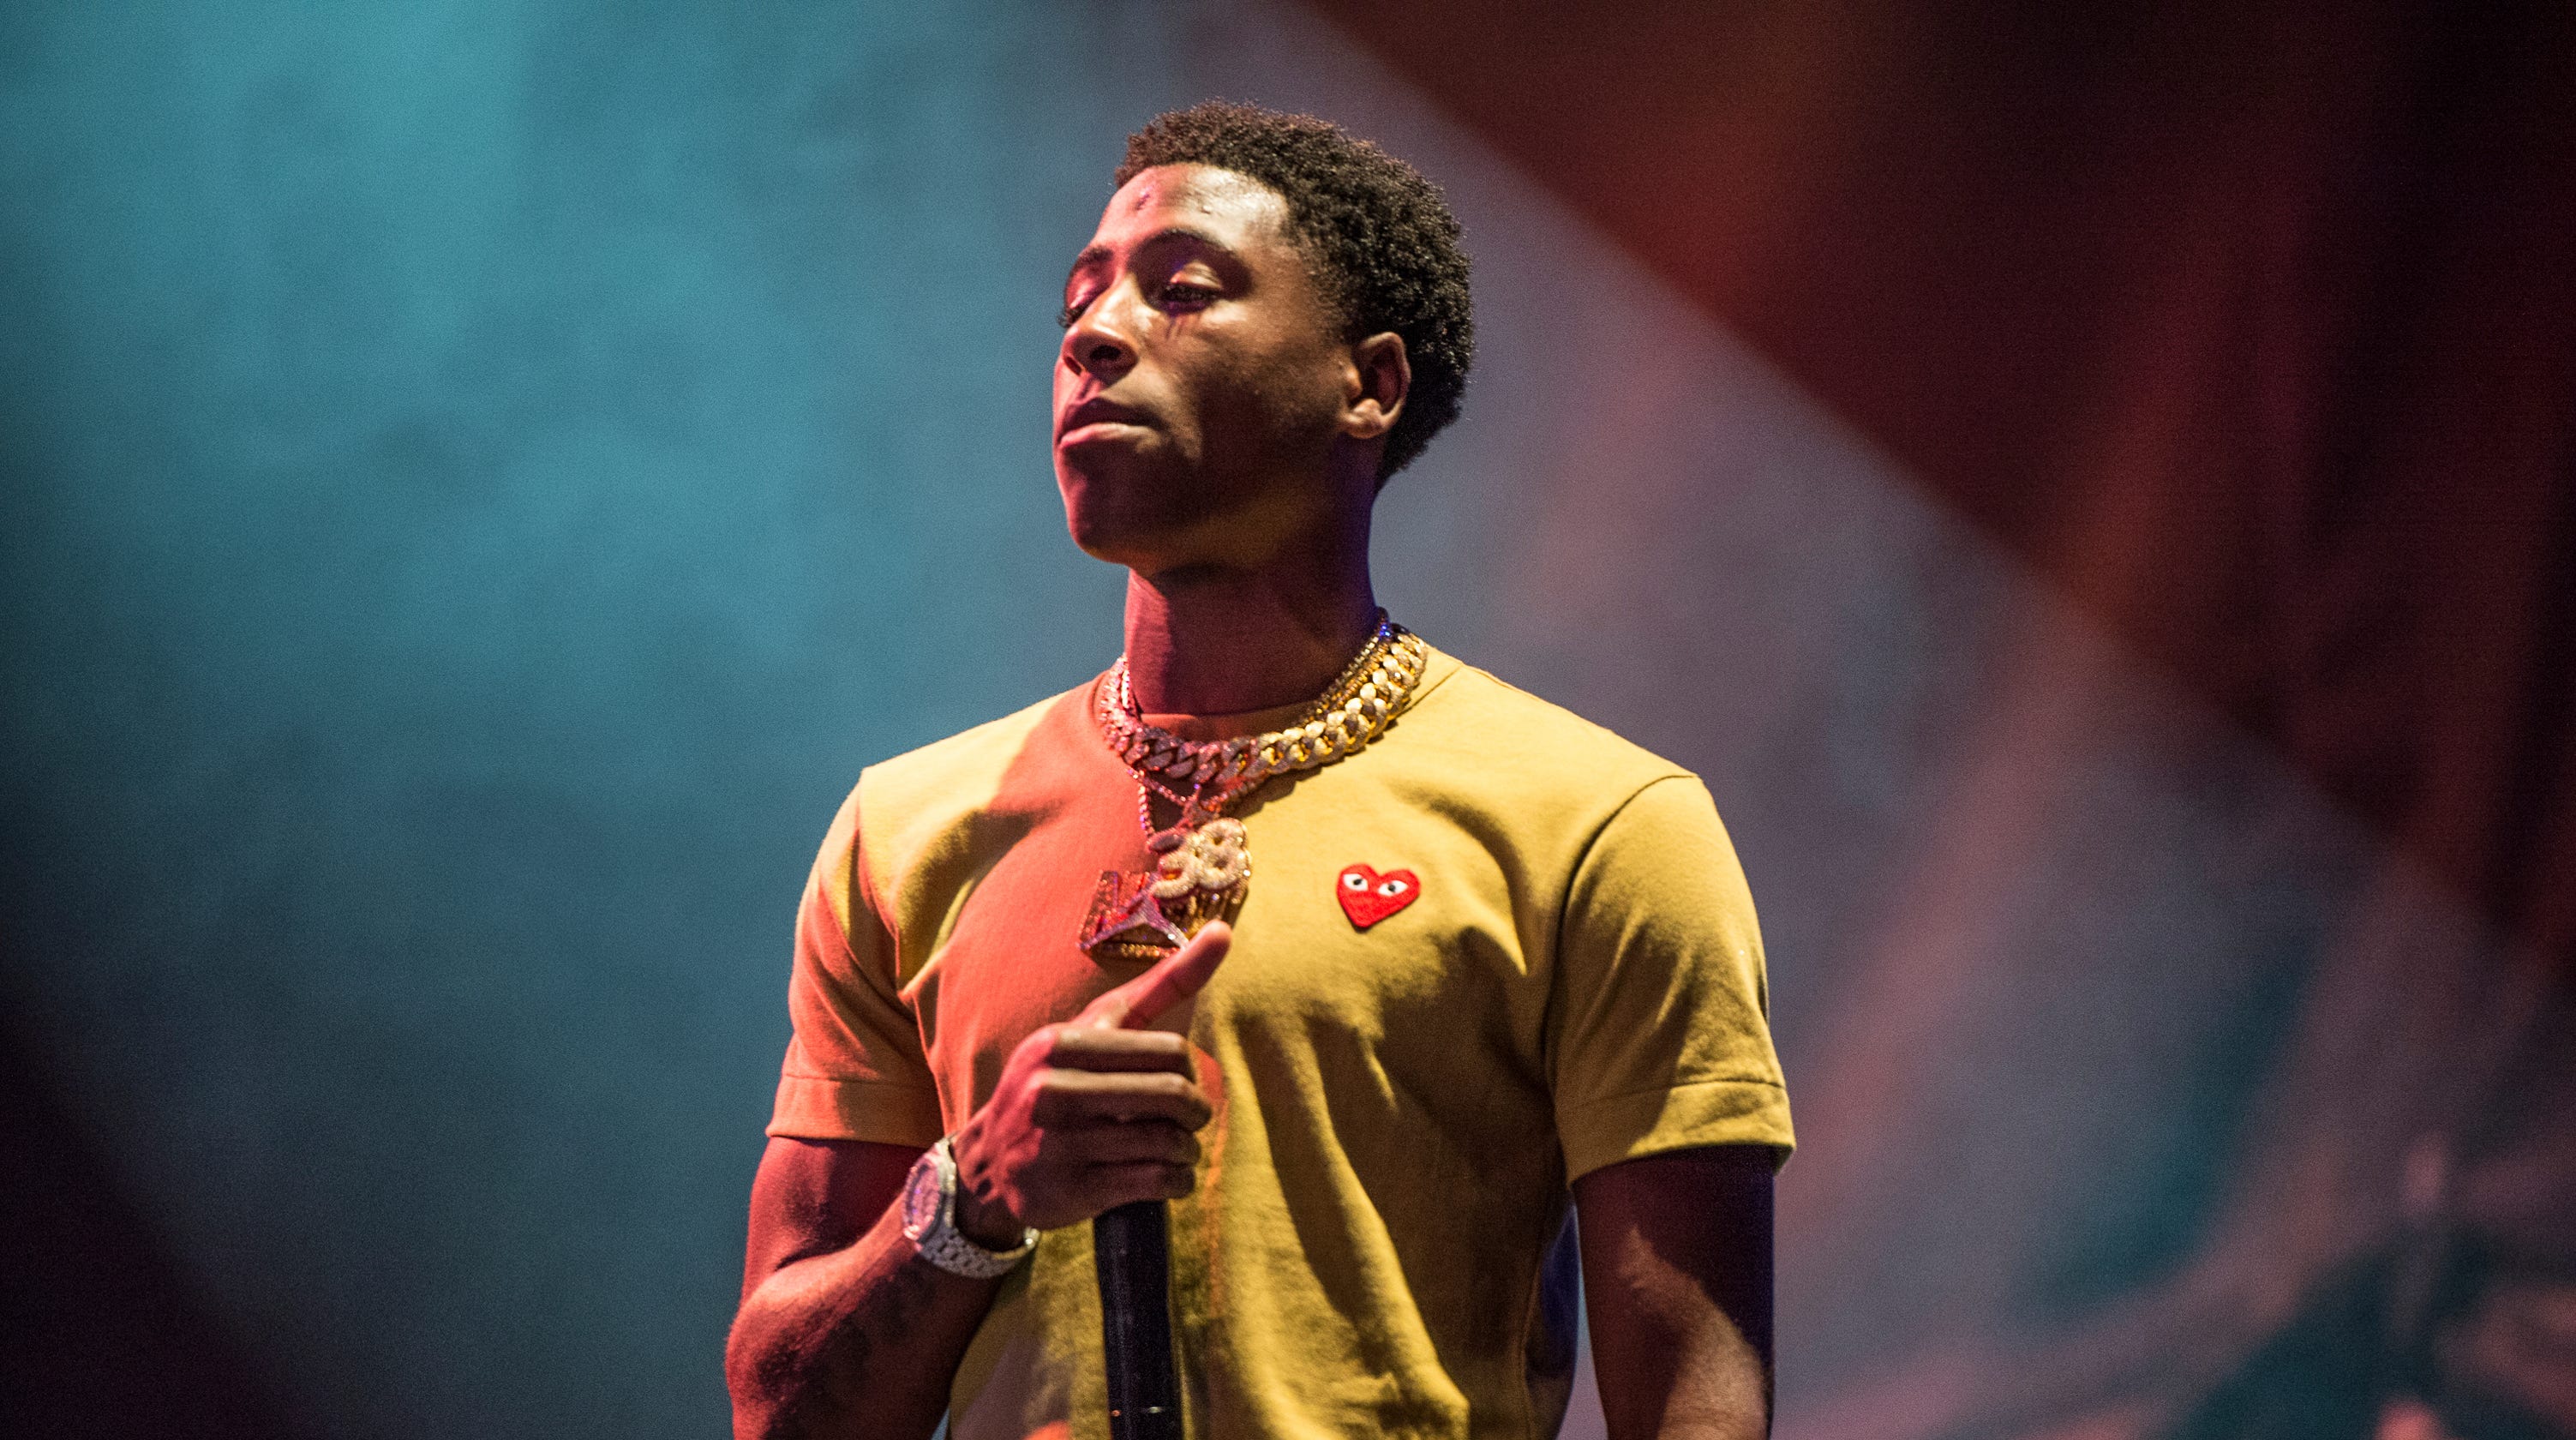 Nba youngboy most popular songs